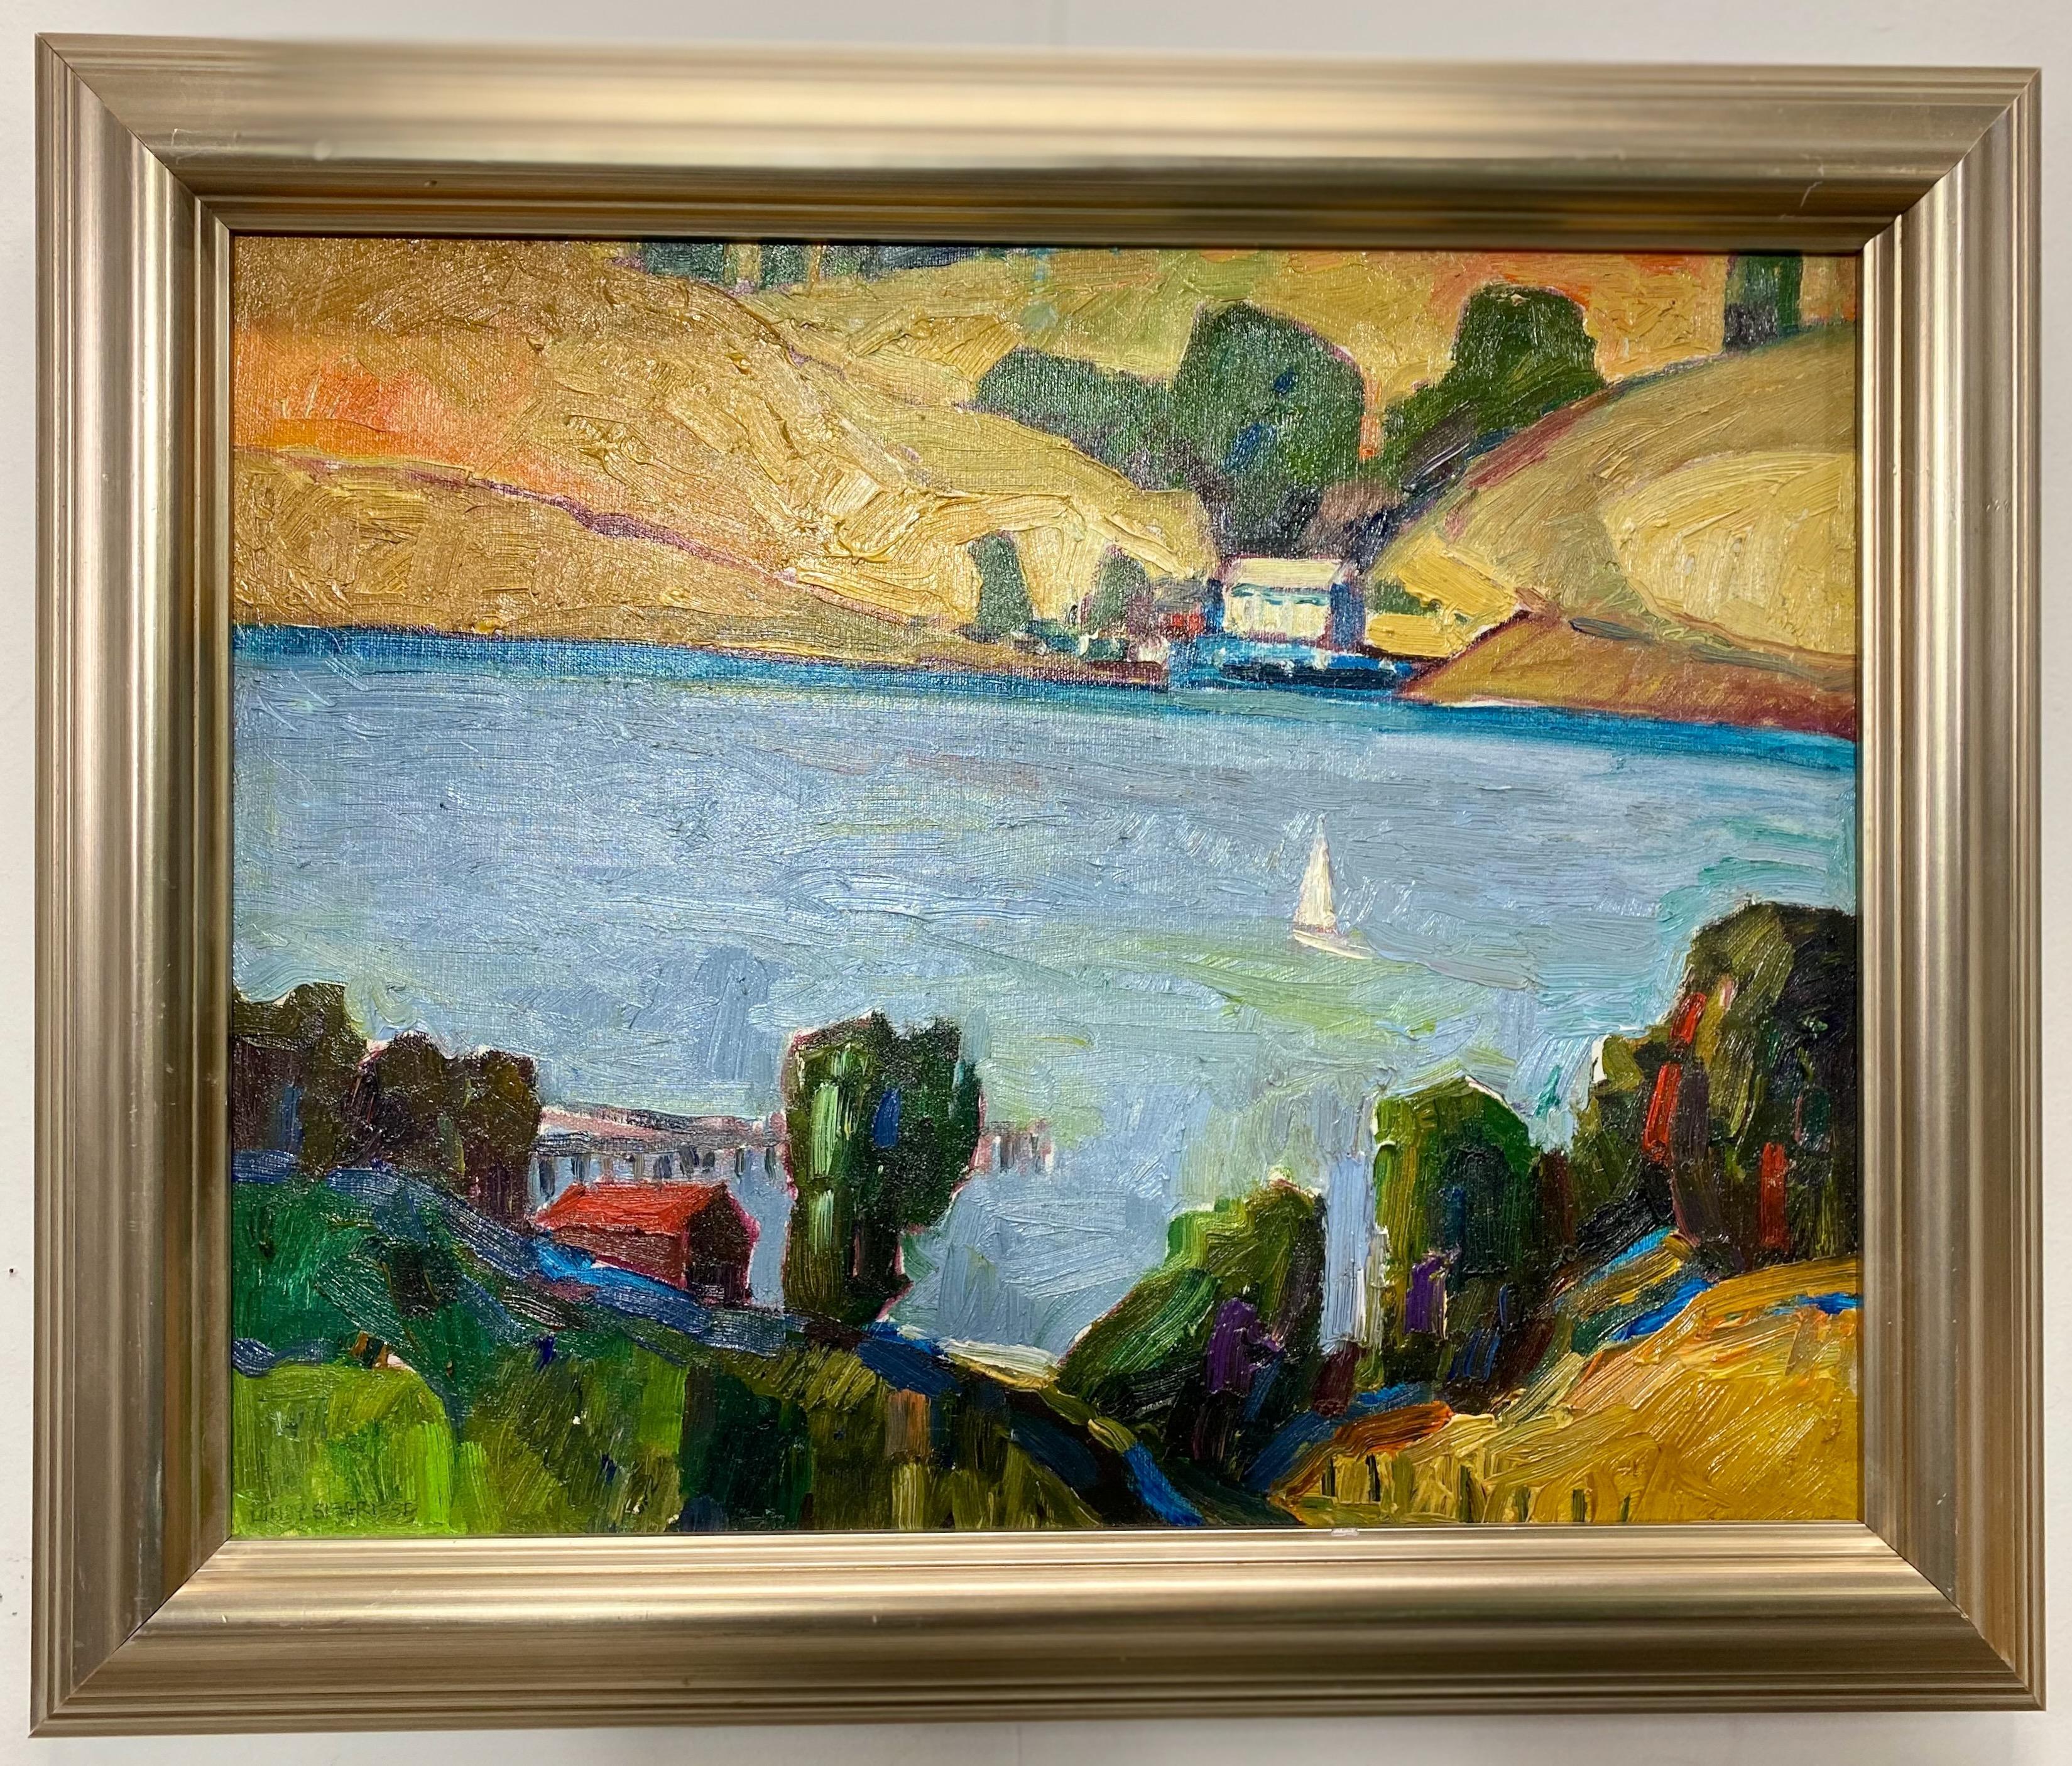 Expressionist or Fauvist style coastal landscape painting of the Carquinez Straits at the northern end of San Francisco Bay where the Sacramento River meets the bay.
Oil on canvas, signed Lundy Siegriest, having the original exposition label on the